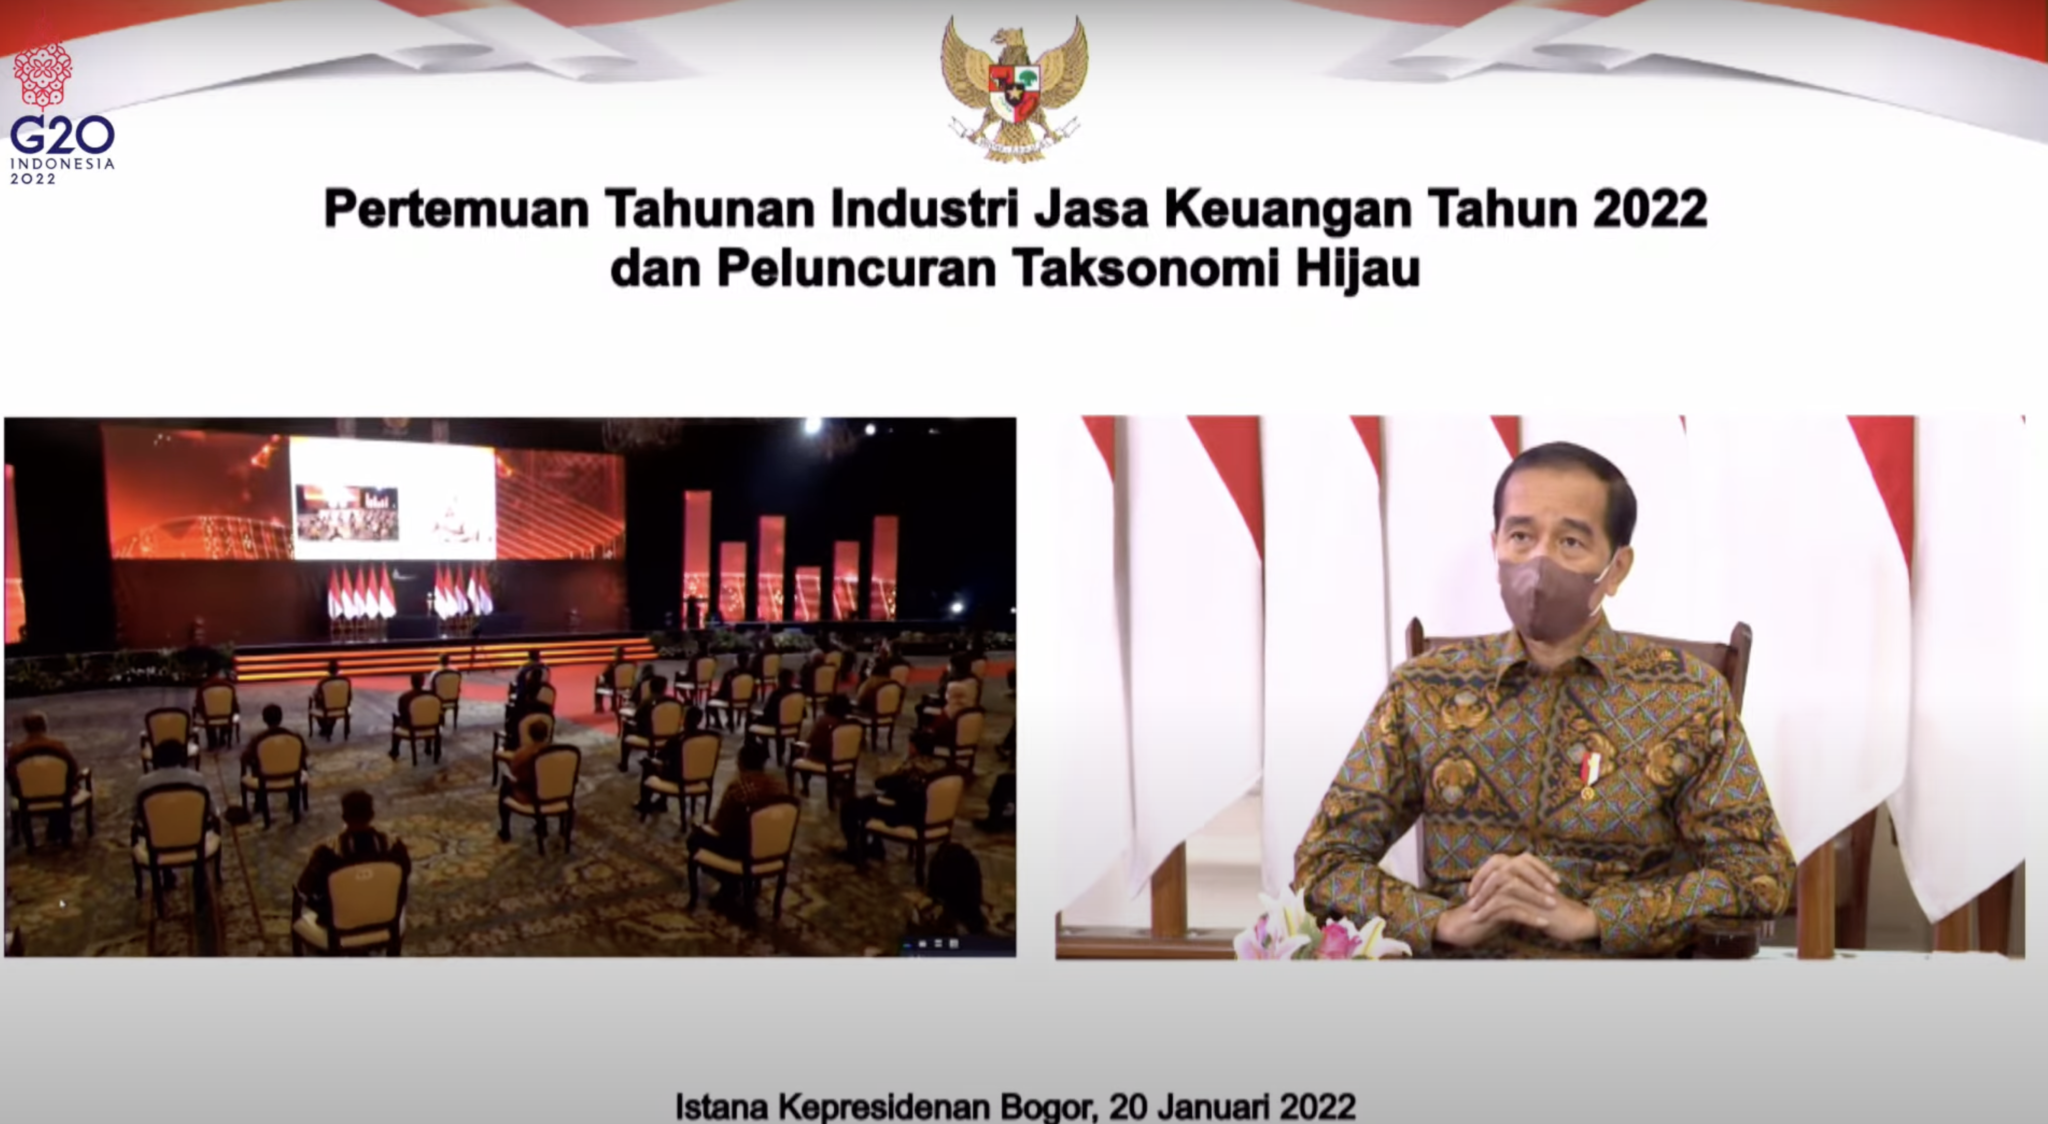 President Jokowi attends the 2022 Financial Services Industry Meeting and the Launching of the Indonesian Green Taxonomy, virtually from the Bogor Presidential Palace, West Java province, Thursday (01/20). (Source: screenshot)